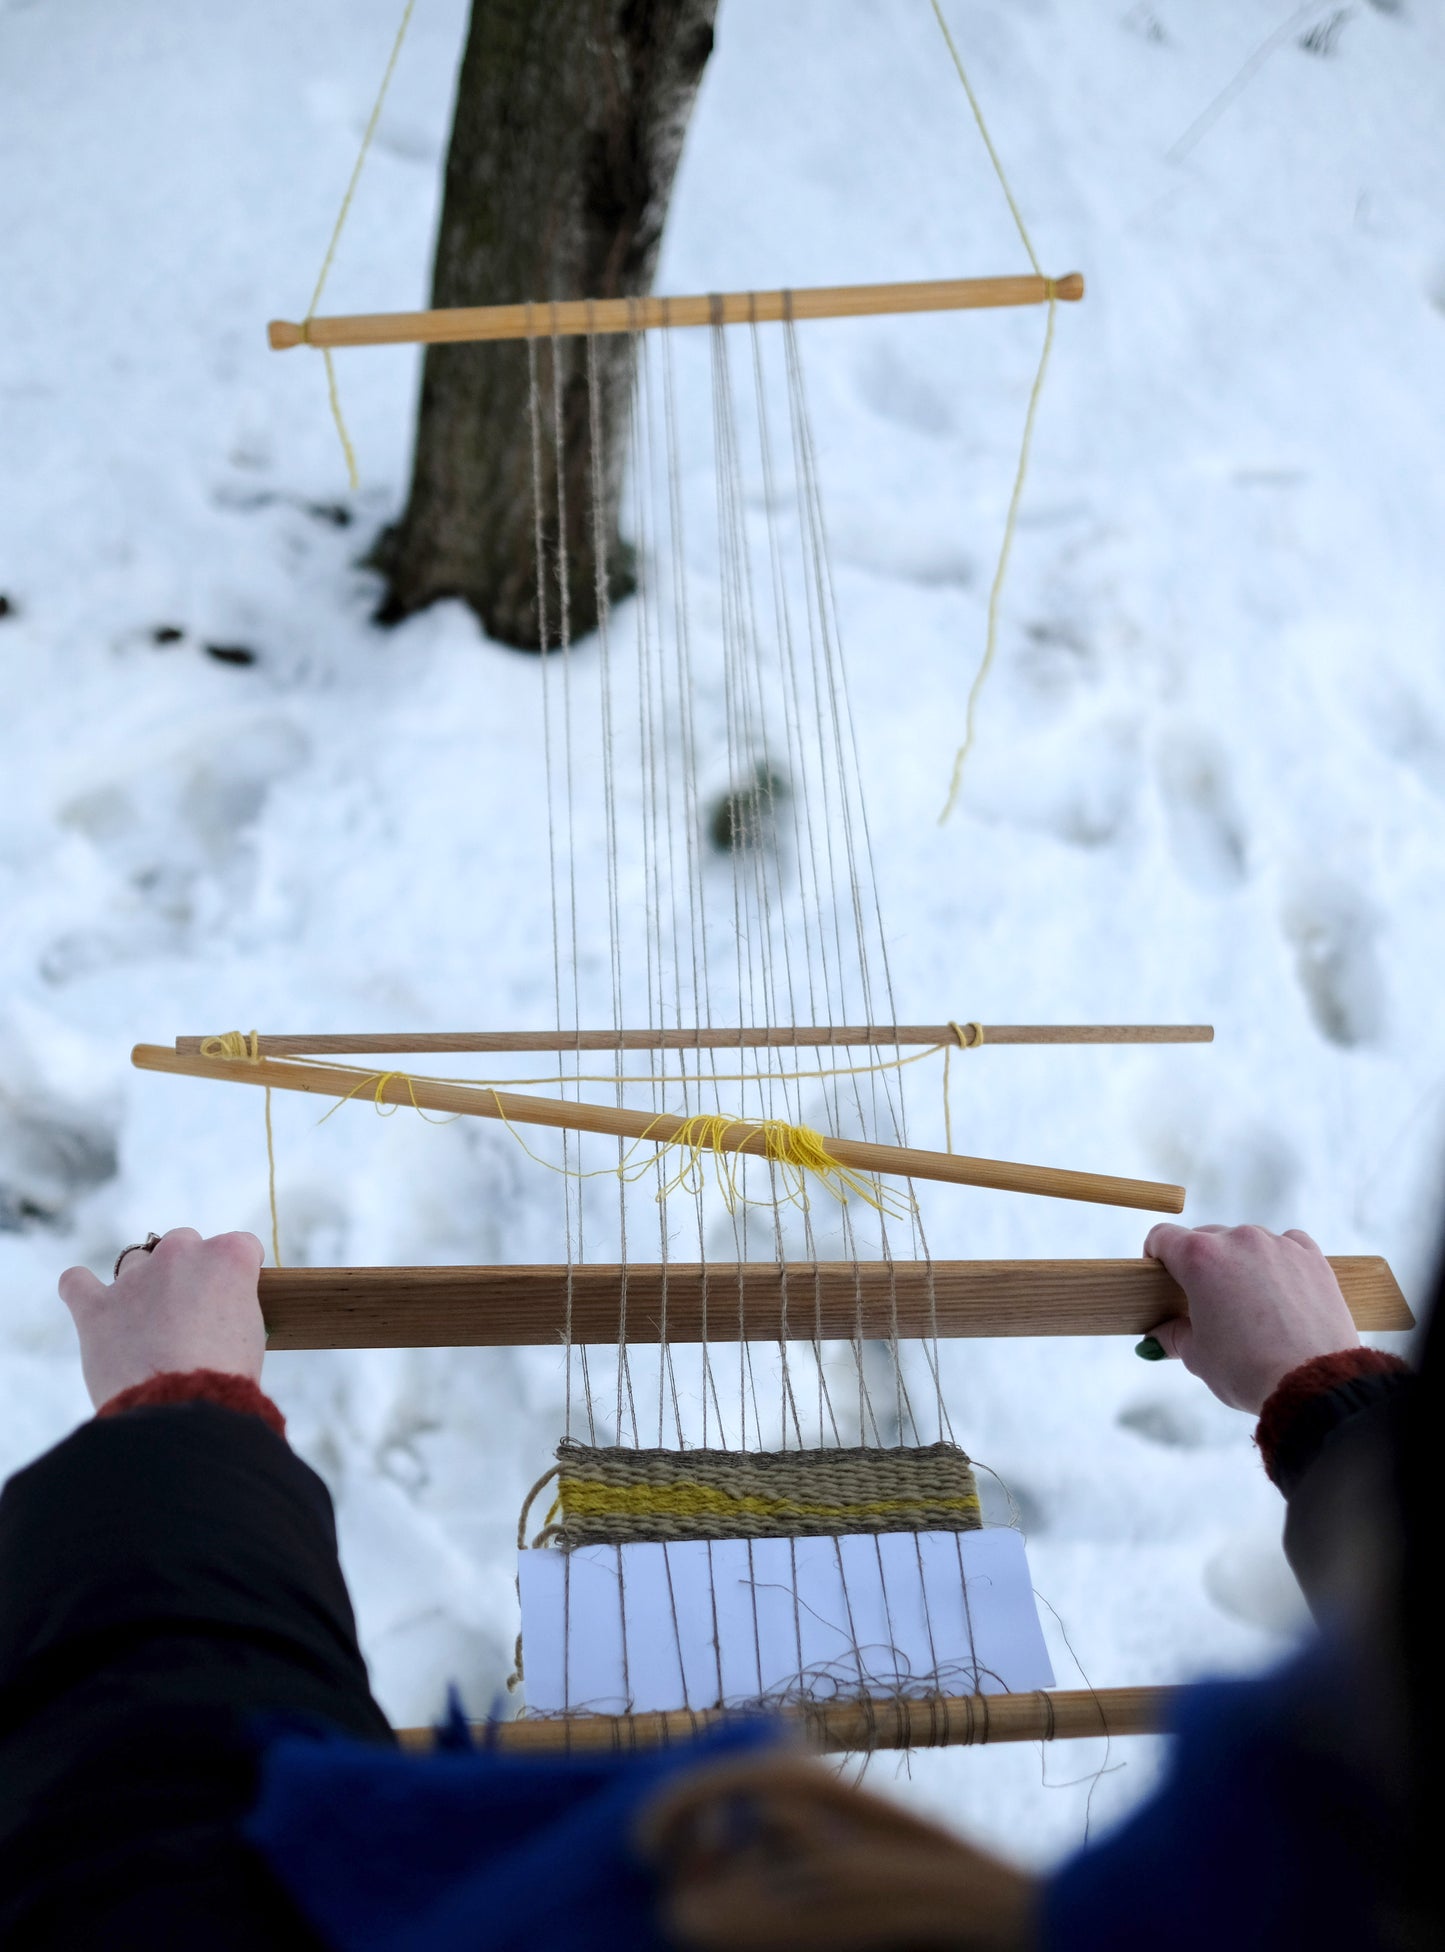 You can weave anywhere on a backstrap loom, even attached to a tree in the middle of winter!